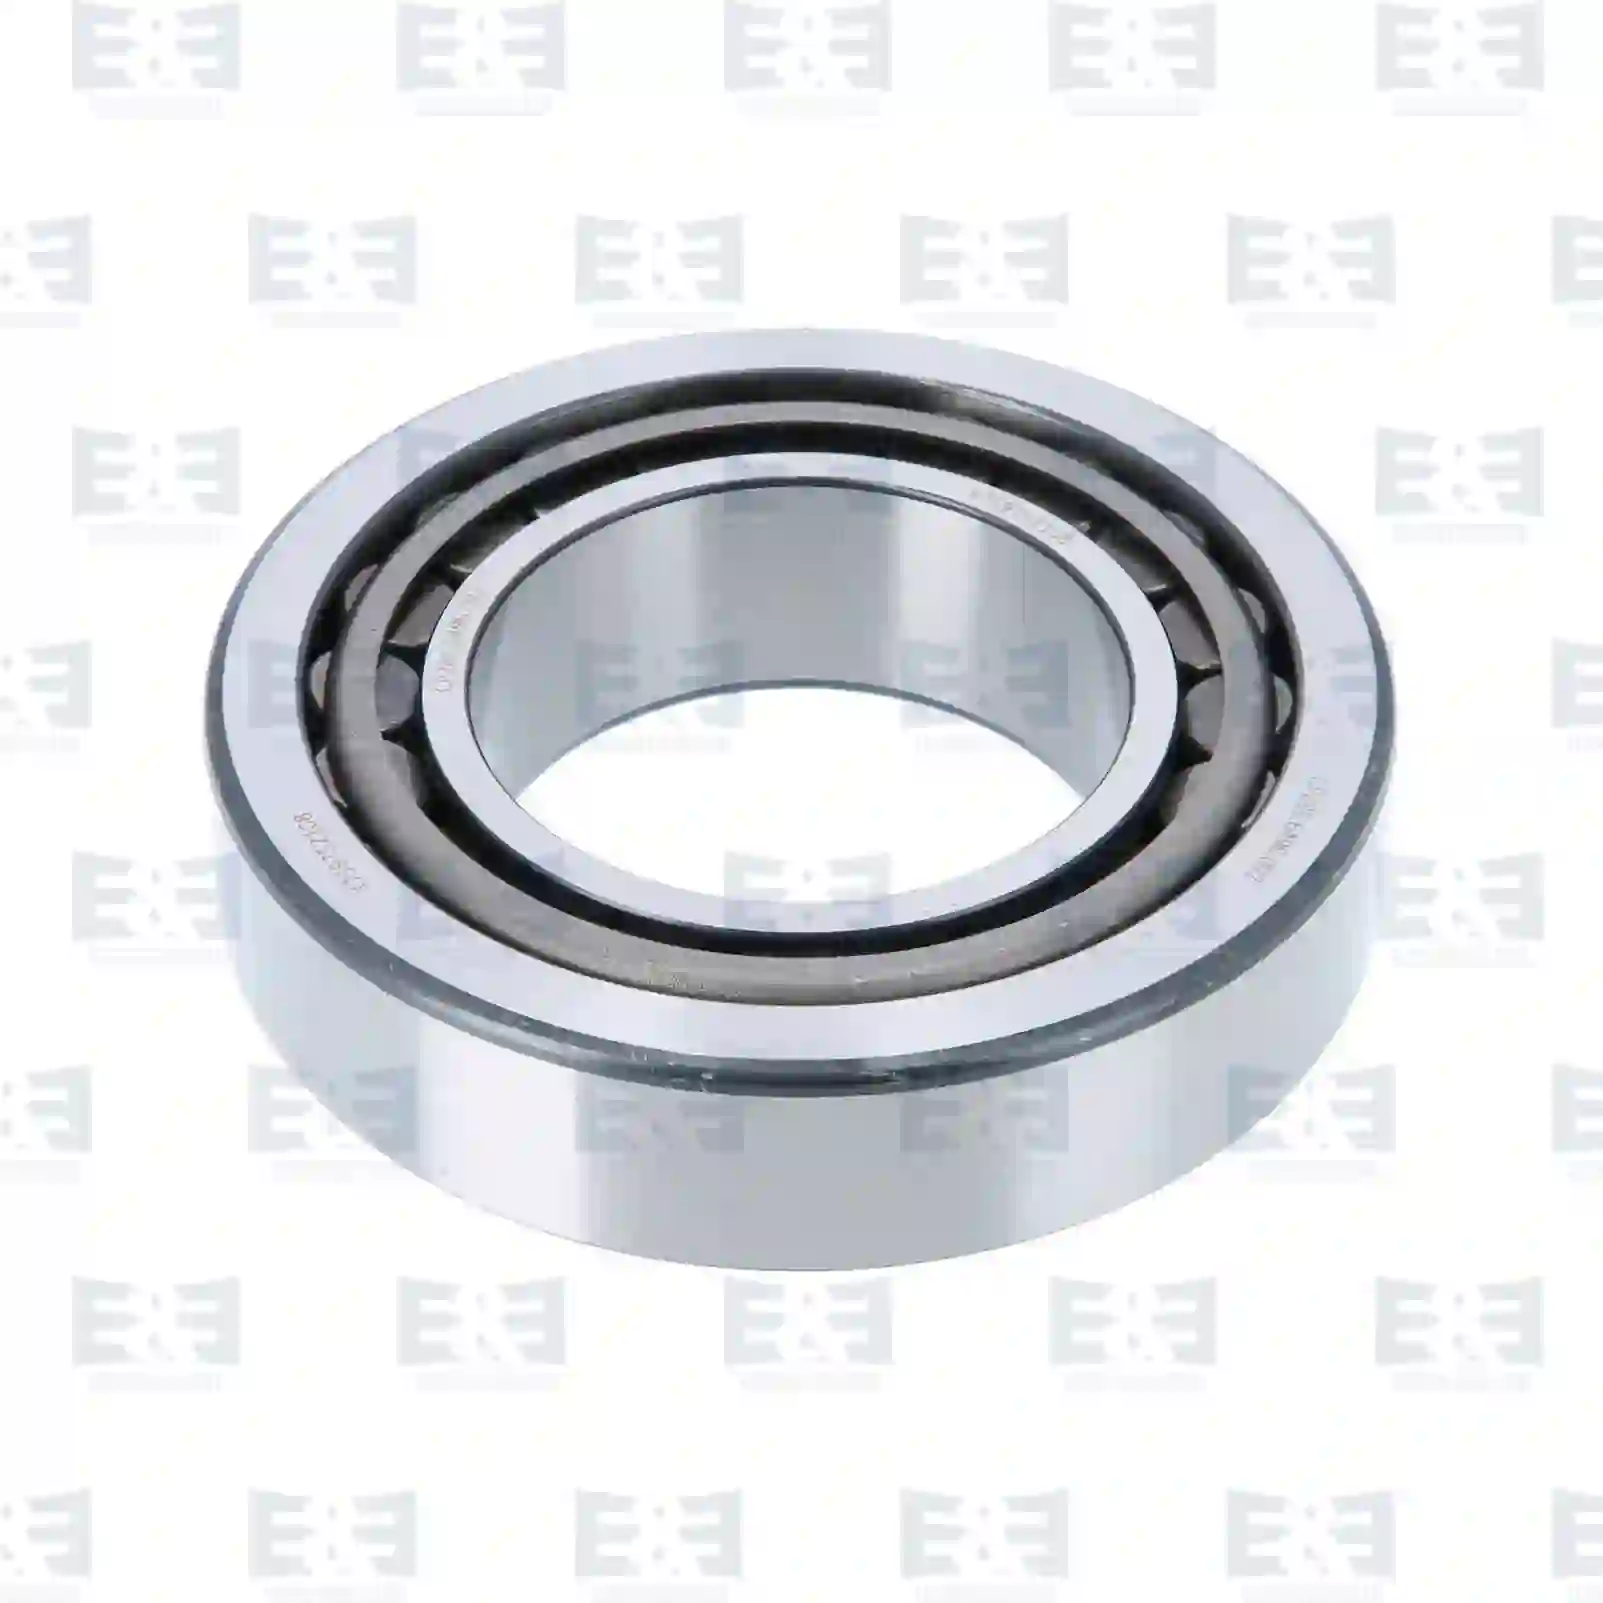 Bearings Tapered roller bearing, EE No 2E2286482 ,  oem no:410707, 6387762, 99041057, 94060944, 1-09812079-0, 1-09812196-0, 9-00093115-0, 00564707, 01905353, 26800240, 3612949000, 99041057, 06324990008, 000720032218, 0345245000, 38325-90010, 0023432218, 0959232218, 0959532218, 5000021842, 4200002700, 14835, EN3612949, 6691161000, 324717045000, 19468 E&E Truck Spare Parts | Truck Spare Parts, Auotomotive Spare Parts